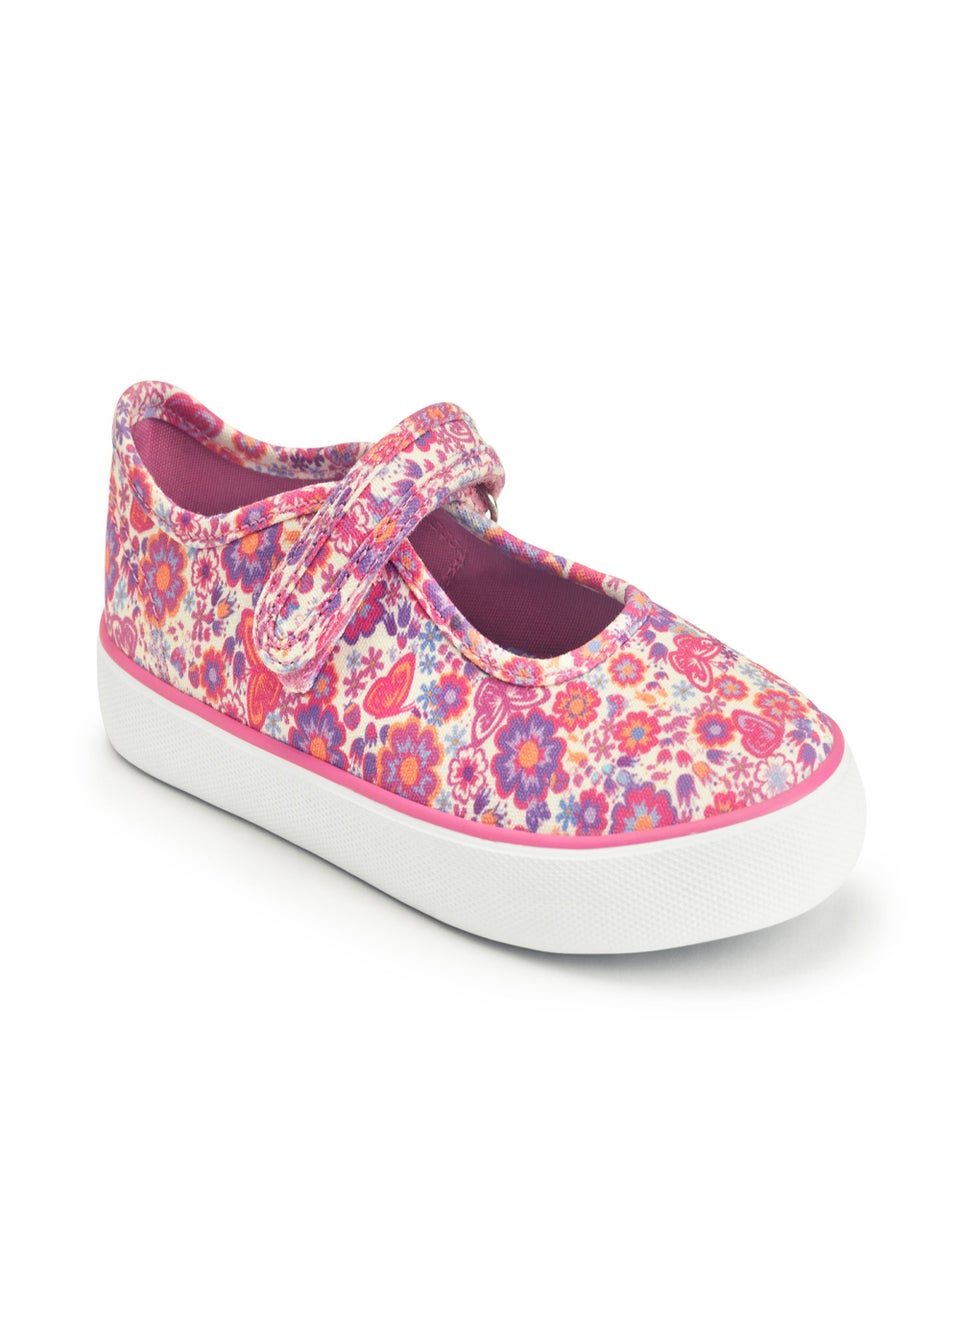 Start-Rite Busy Lizzle Pink Floral Canvas Shoes